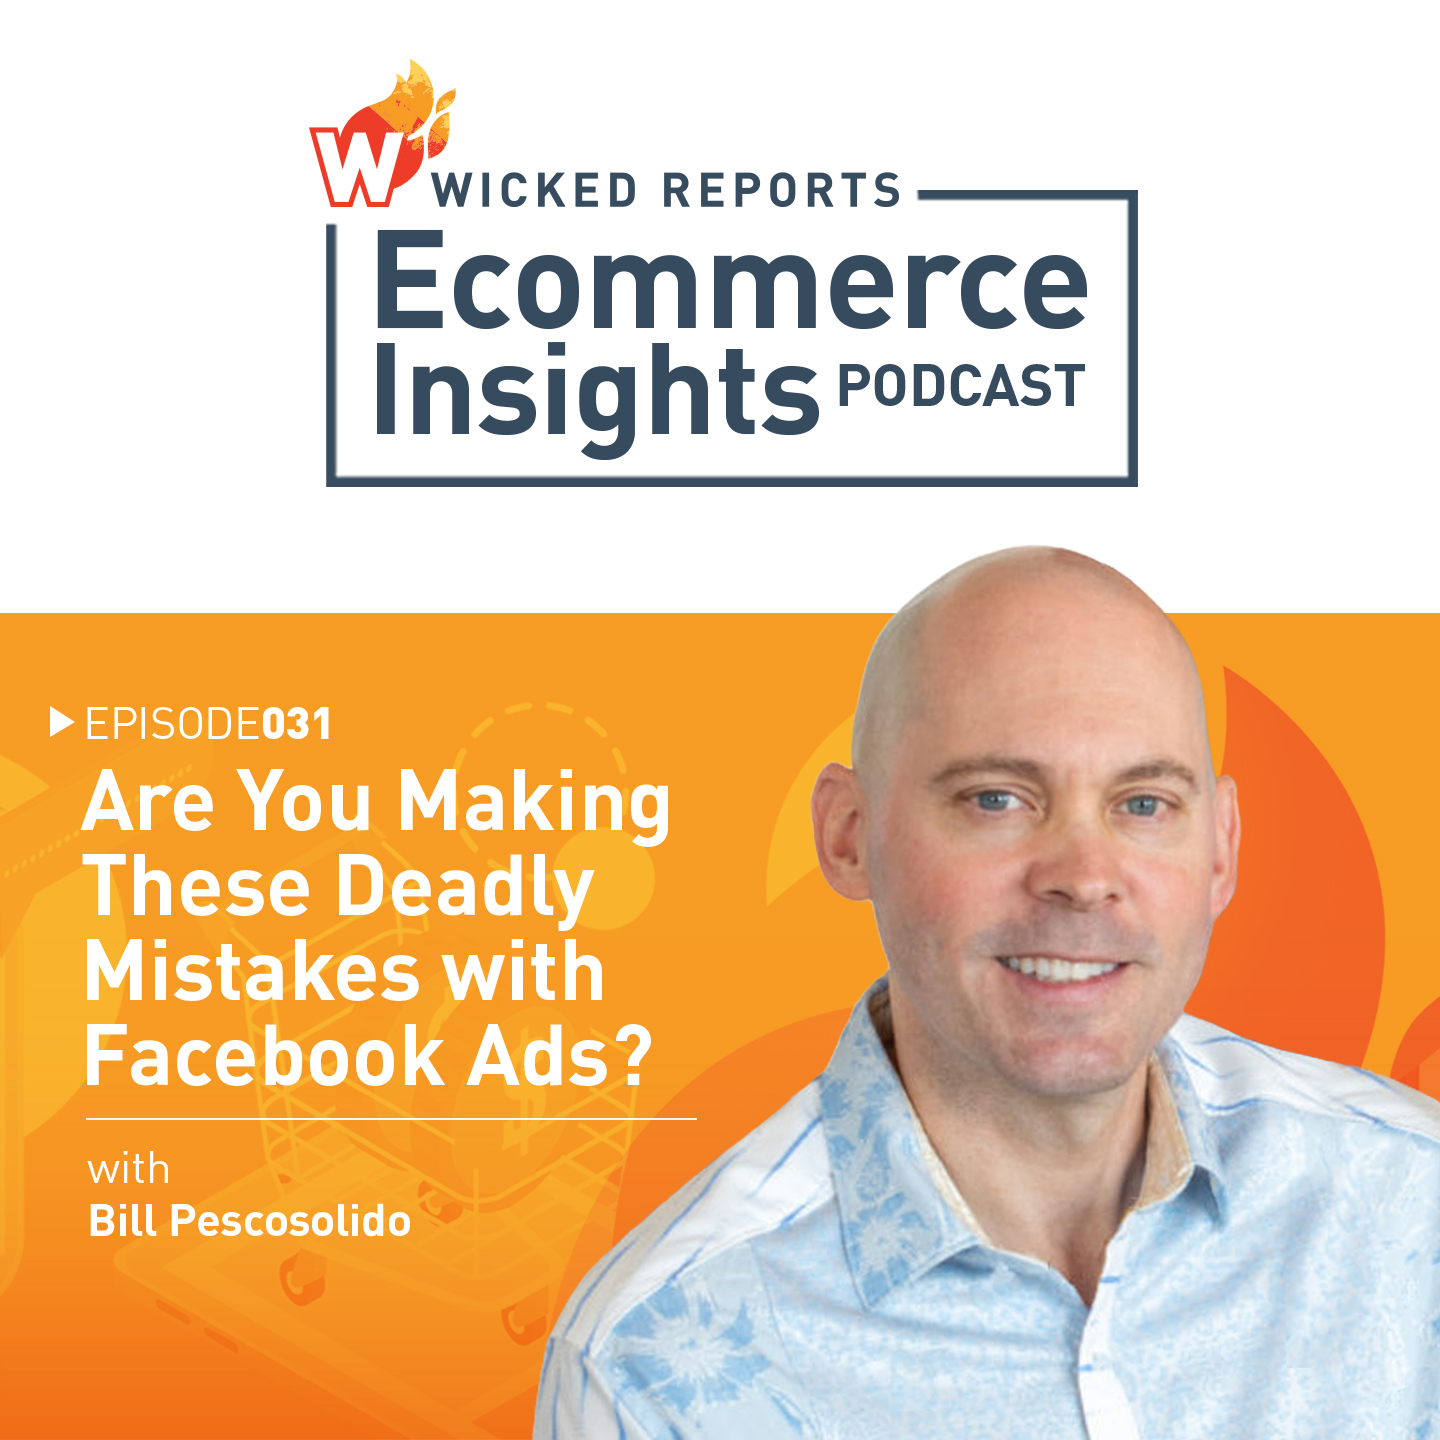 Are You Making These Deadly Mistakes with Facebook Ads? with Bill Pescosolido